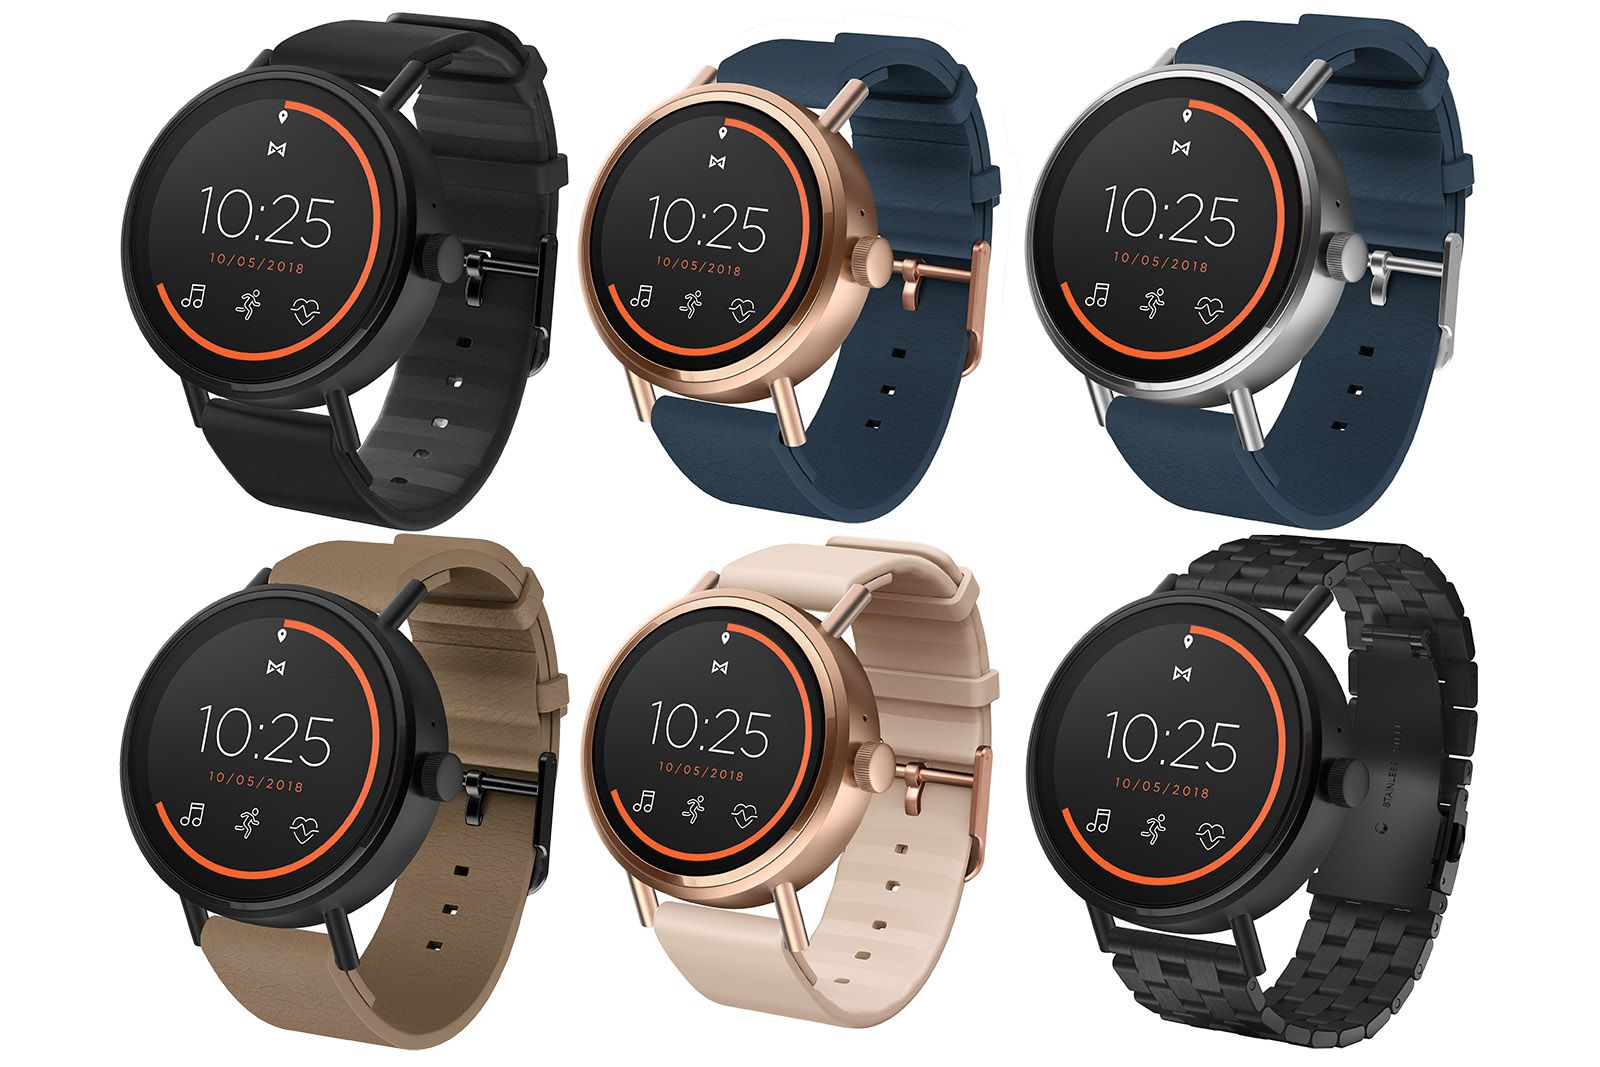 Misfit Vapor 2 is a more stylish more confident Wear OS sequel with GPS image 1